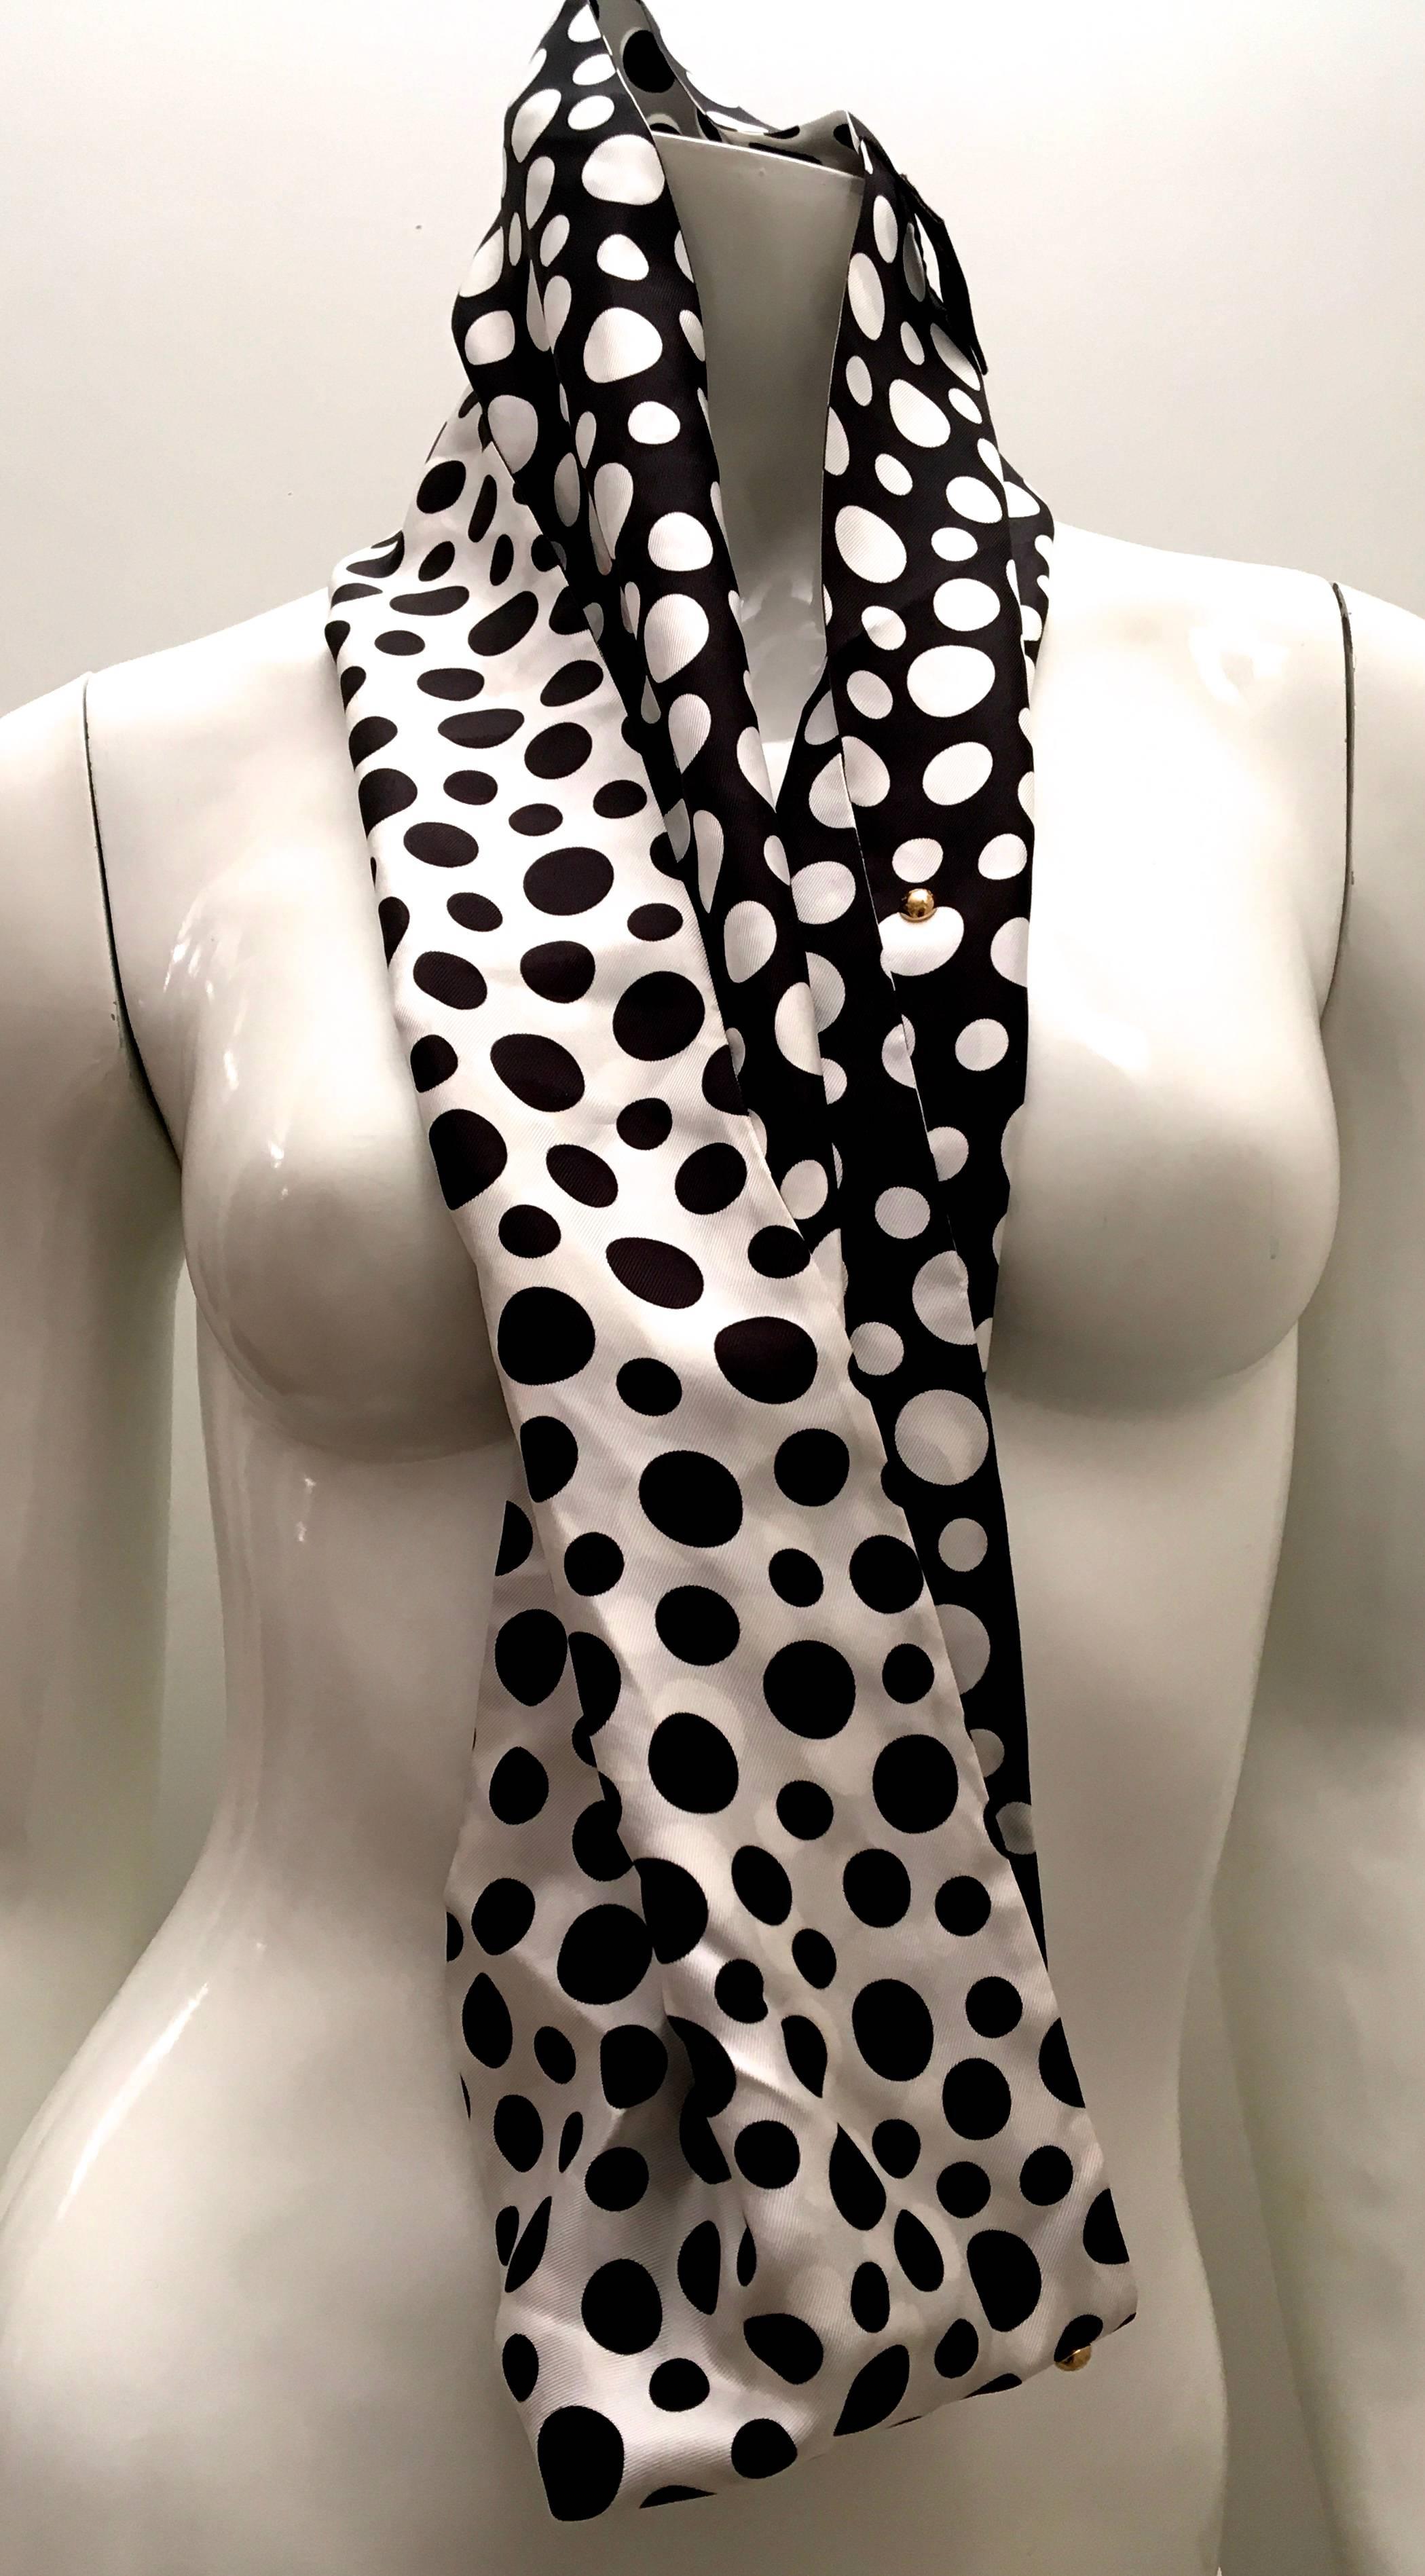 Presented here is a beautiful Louis Vuitton scarf. The styling of the scarf is a snood, so the scarf is sewn on the ends together with a singular twist. The opposite colored design on the back of the scarf with the twist allows for a beautiful and